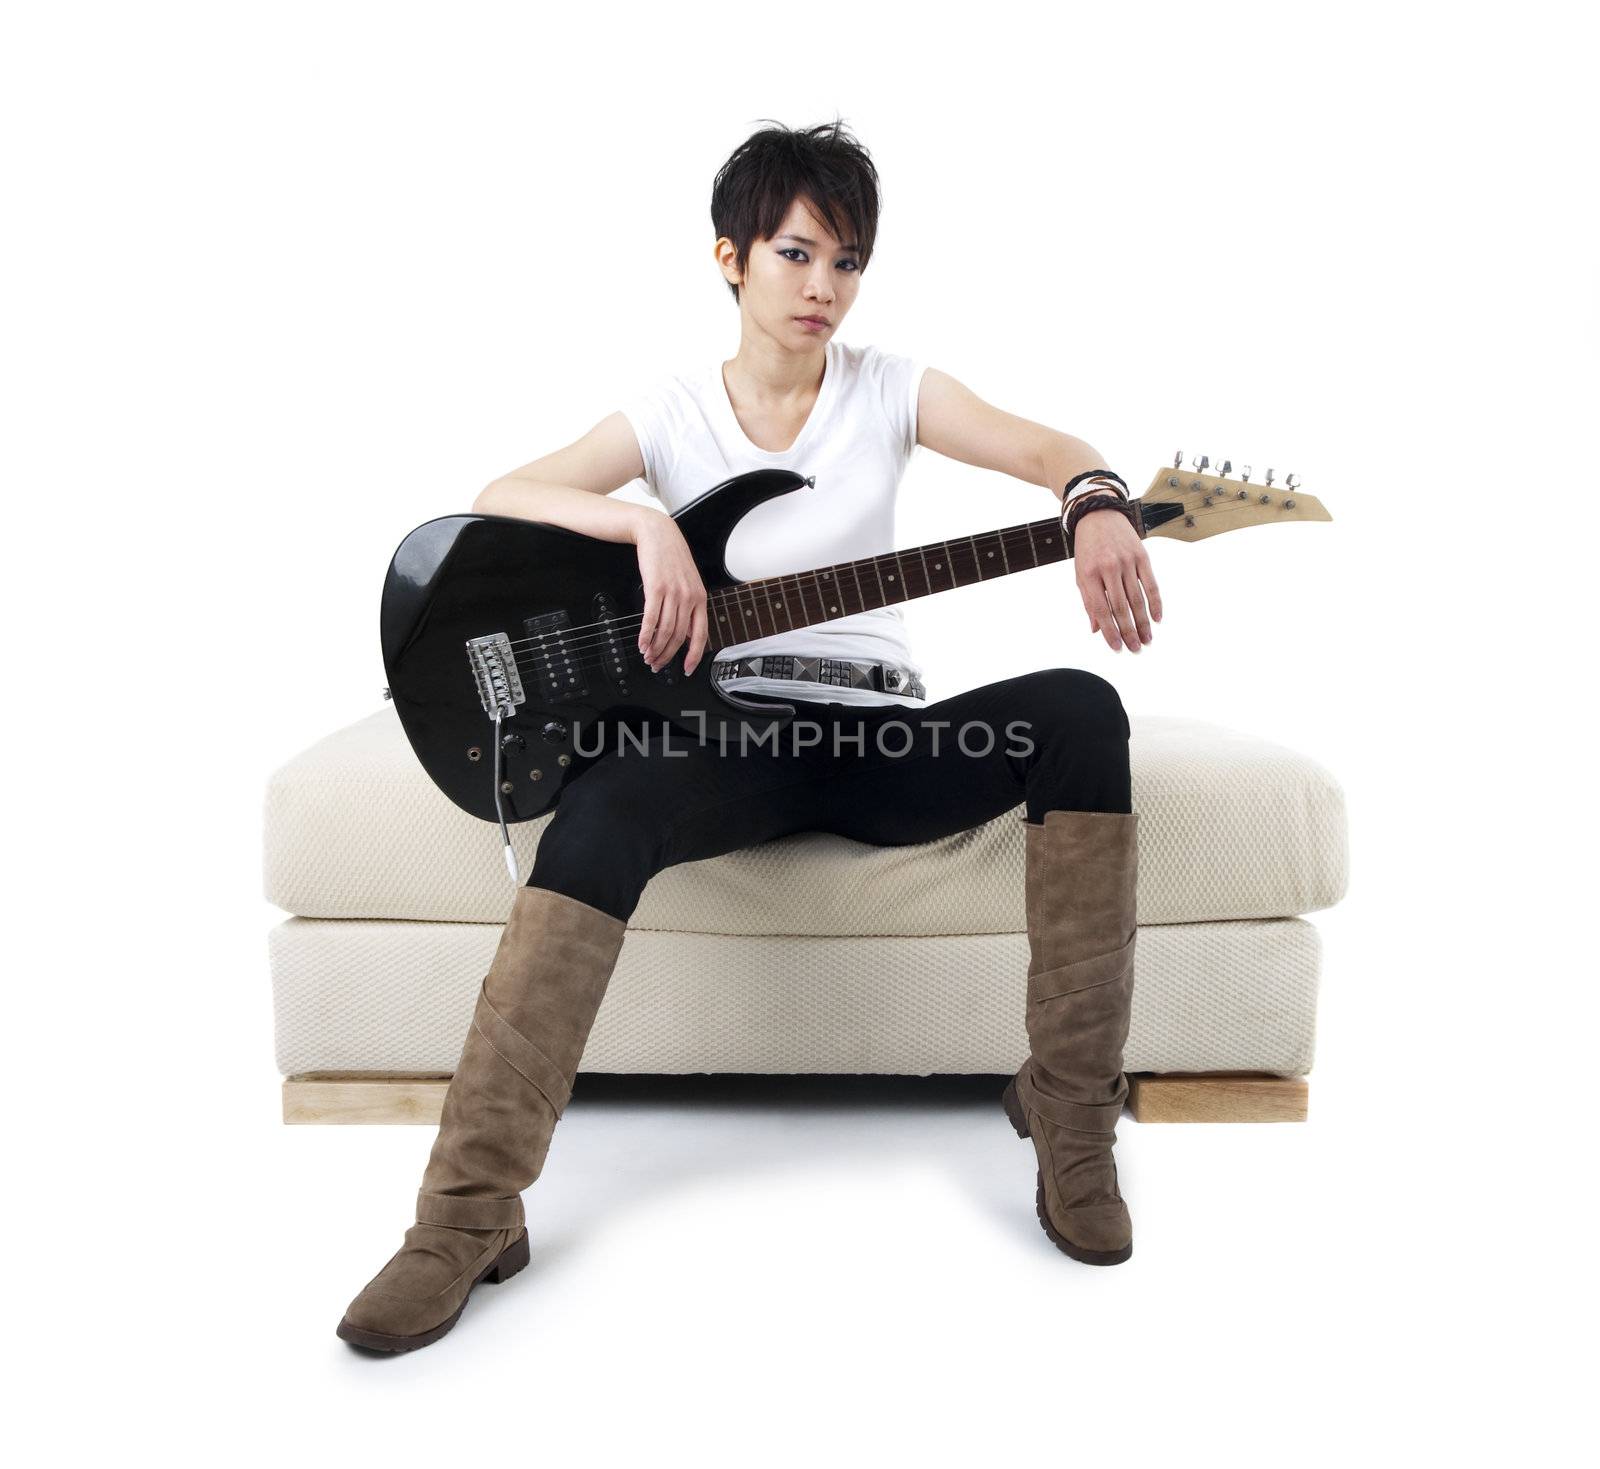 Punk Rockstar holding guitar sitting on sofa isolated in white